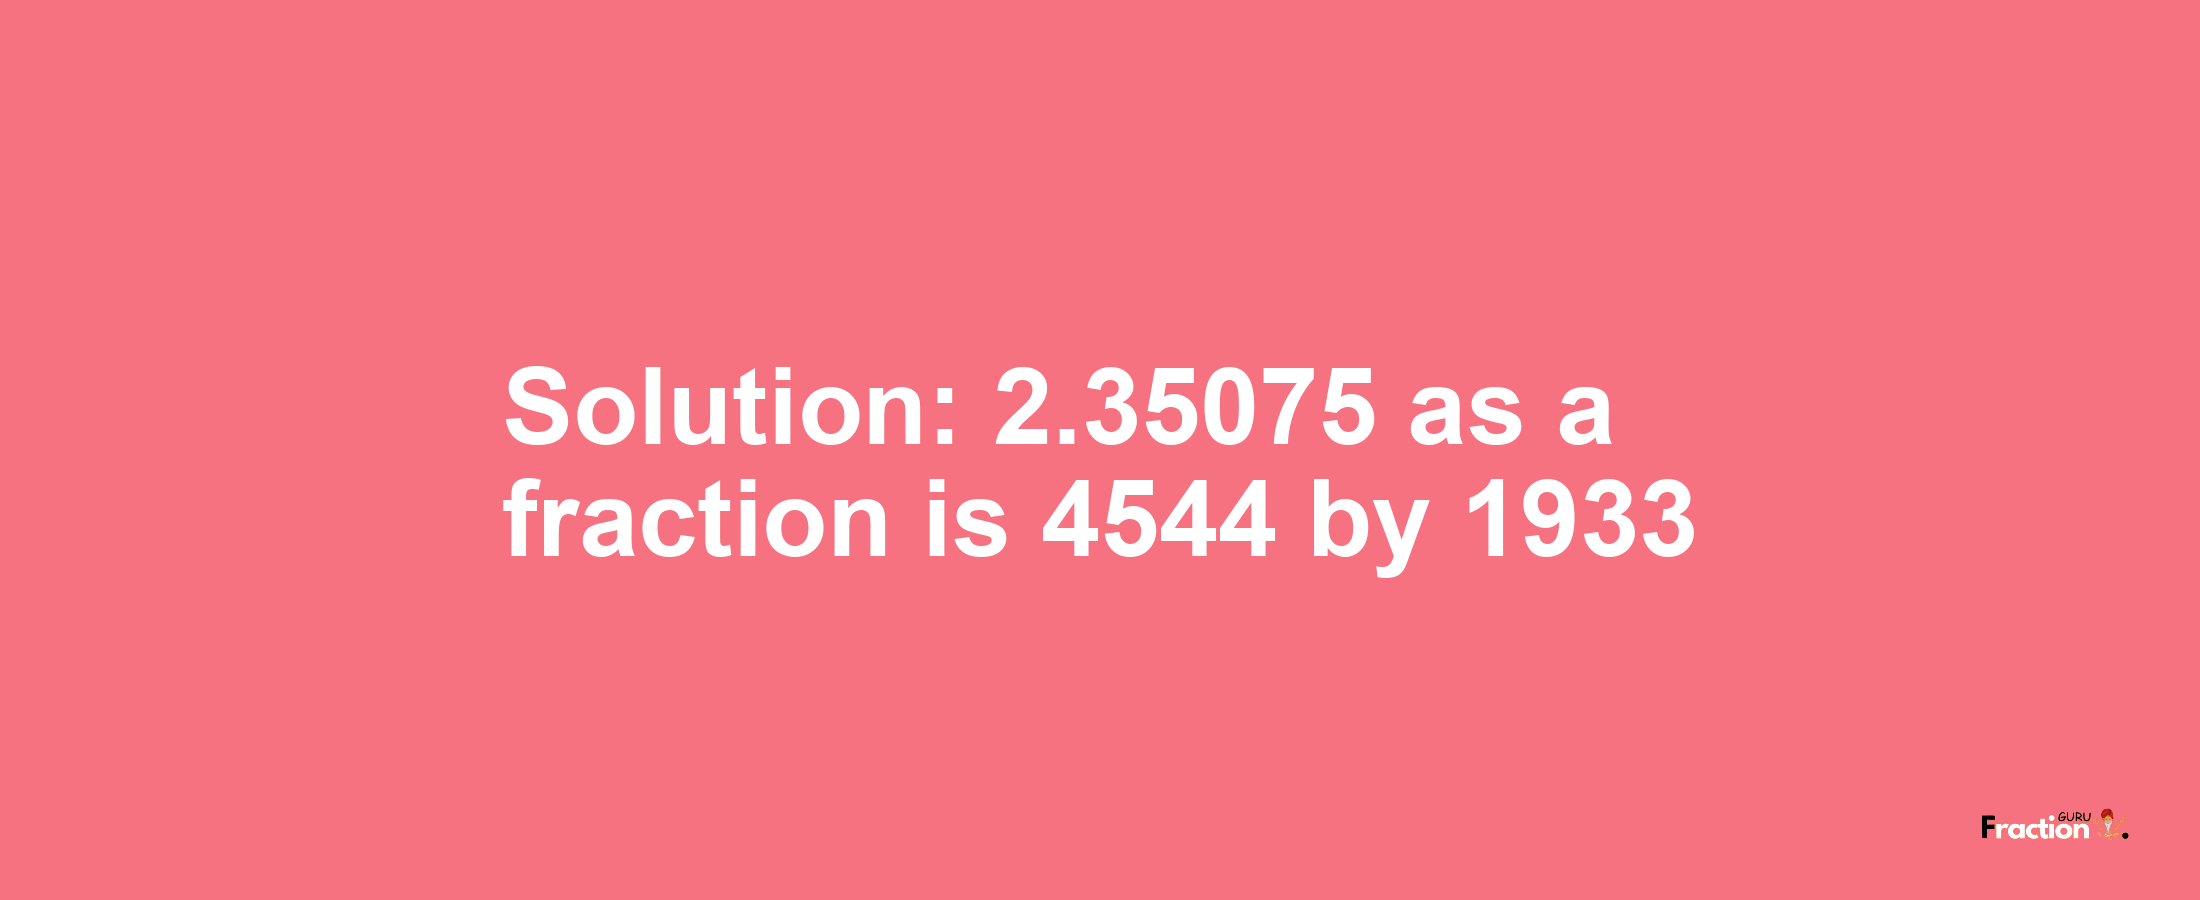 Solution:2.35075 as a fraction is 4544/1933